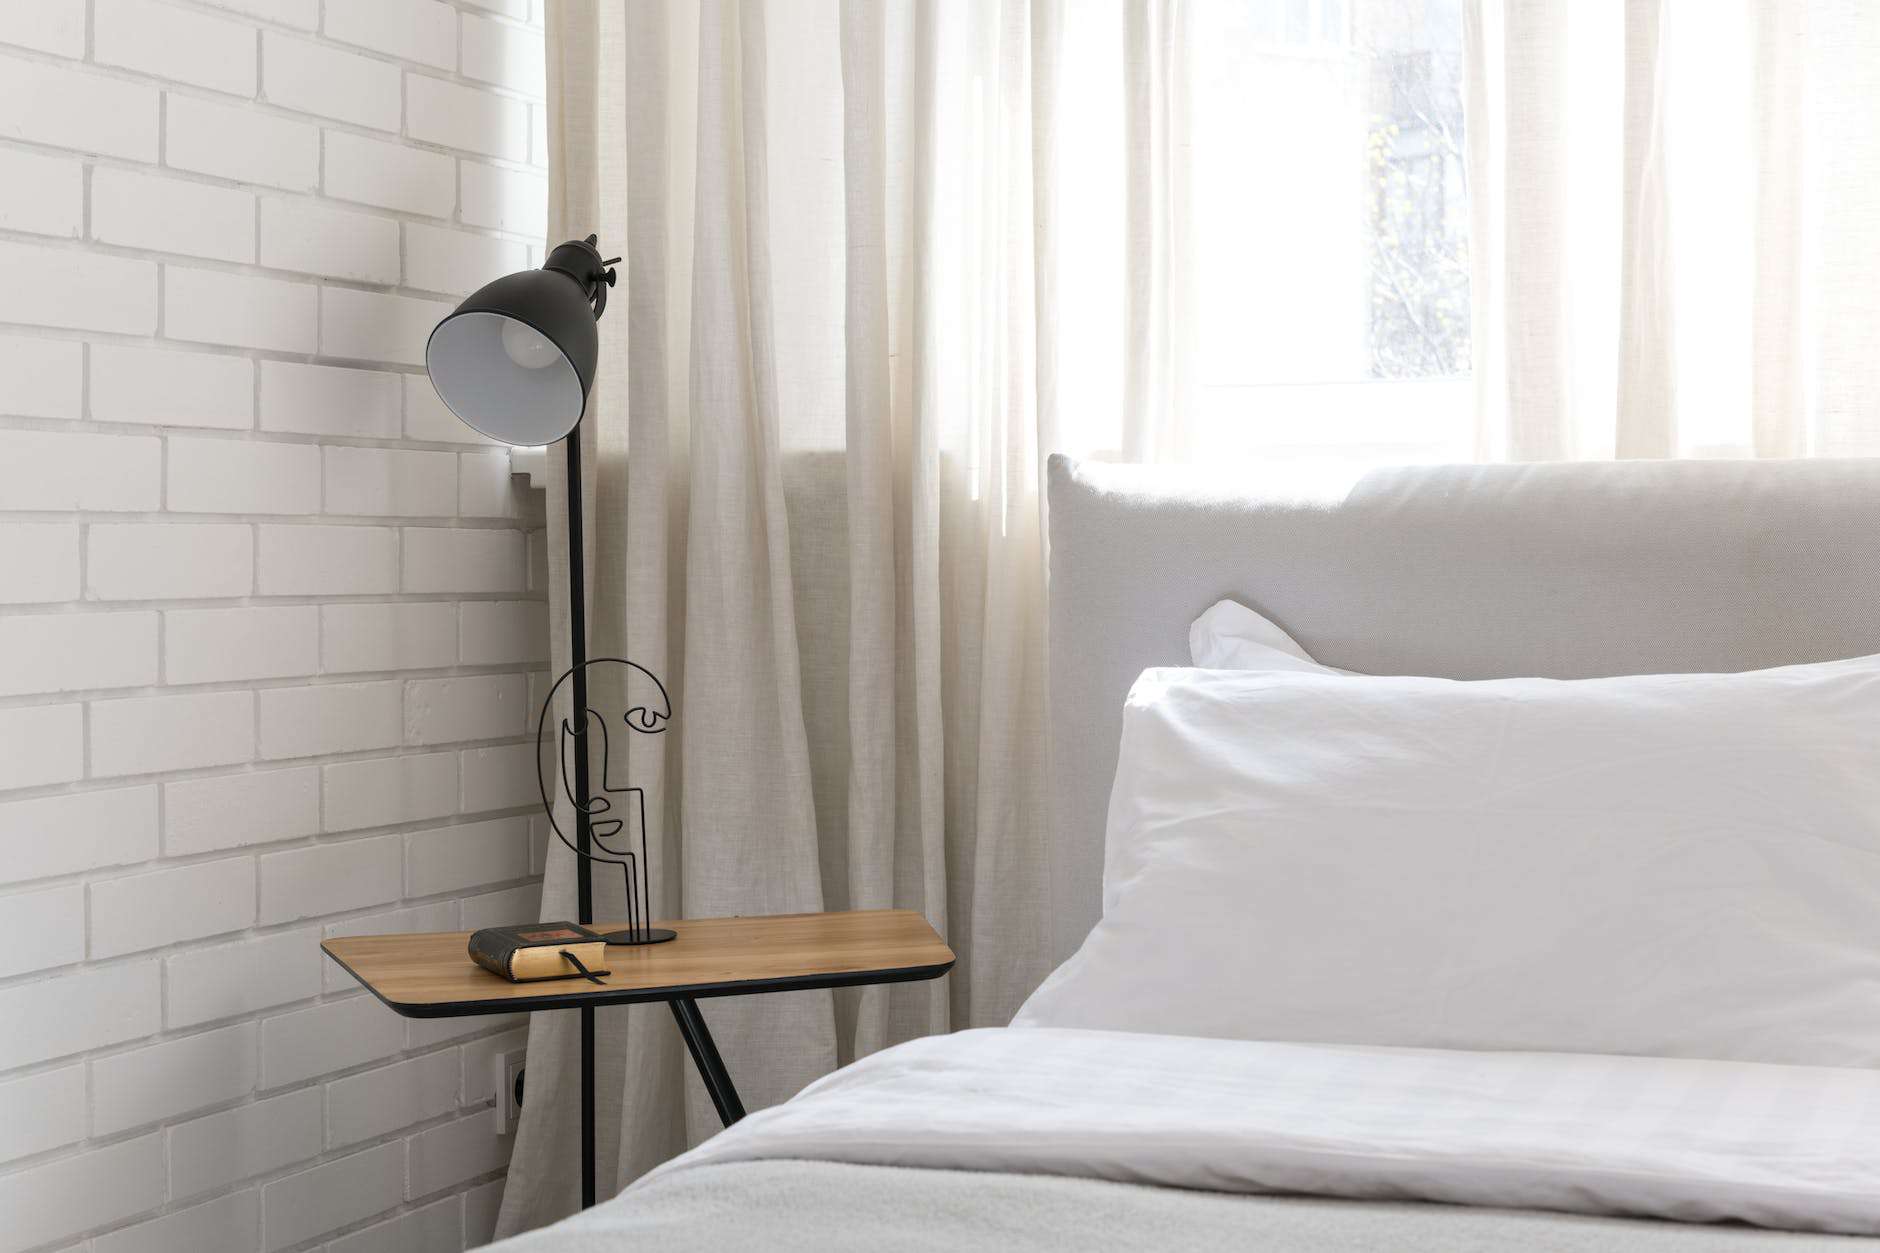 black and white table lamp on brown wooden table beside bed